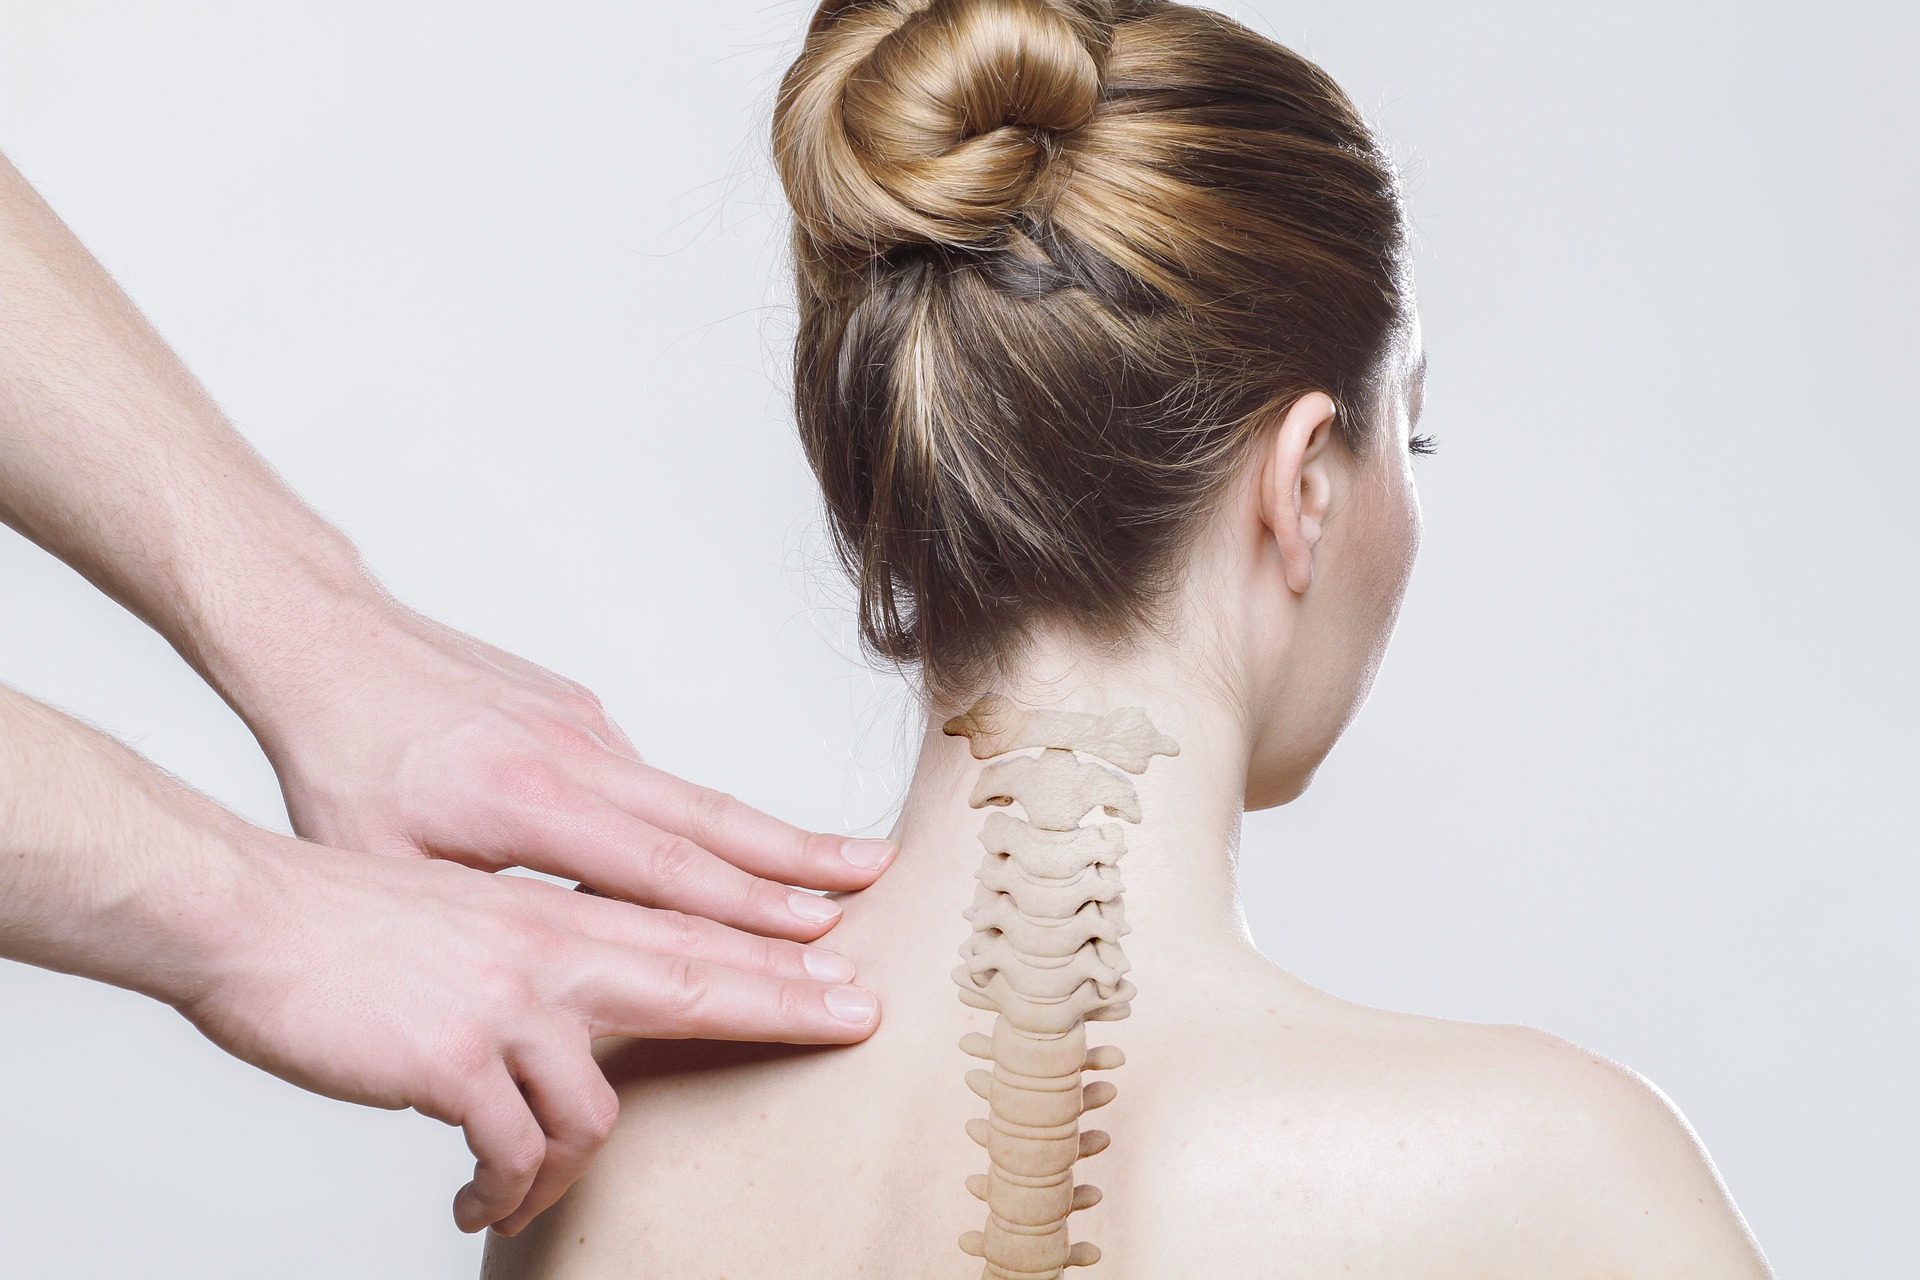 Chiropractic Adjustment Will Help the Kink in Your Neck